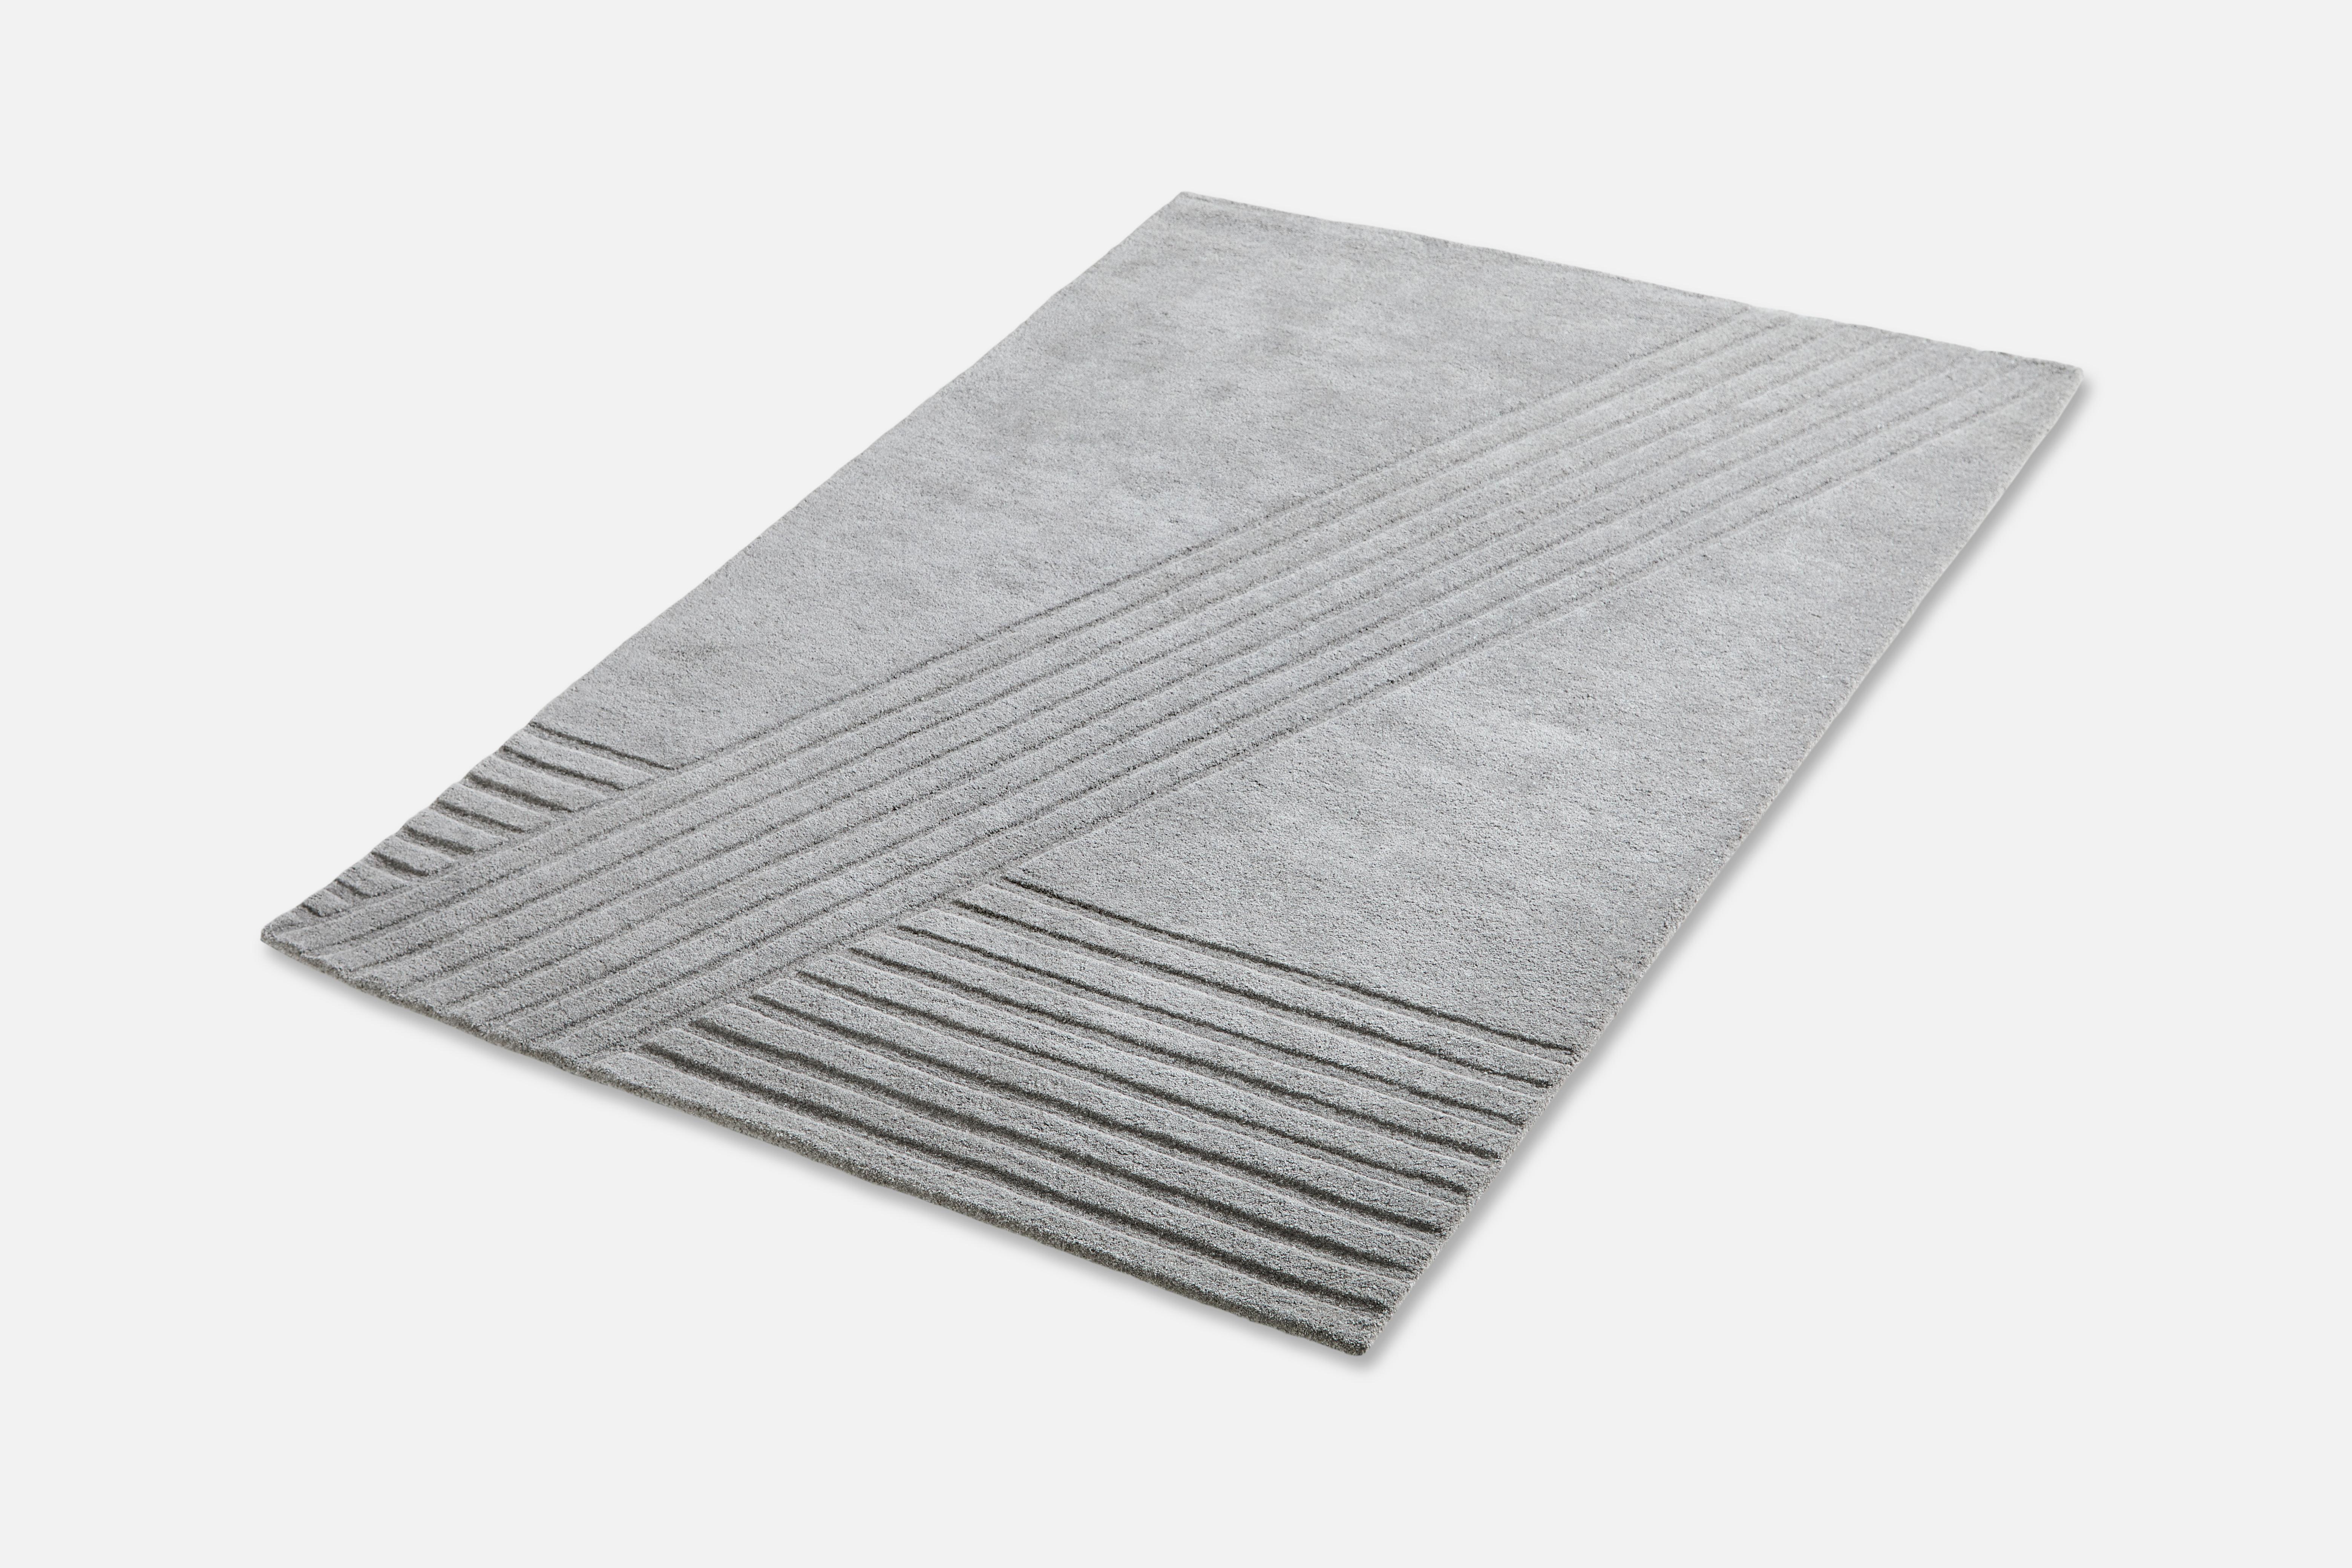 Grey Kyoto rug III by AD Miller.
Materials: 80% wool, 20% cotton.
Dimensions: W 170 x L 240 cm
Available in grey or off white.

The hand-tufted wool rug, Kyoto, takes its inspiration from the distinctive pattern found in traditional raked